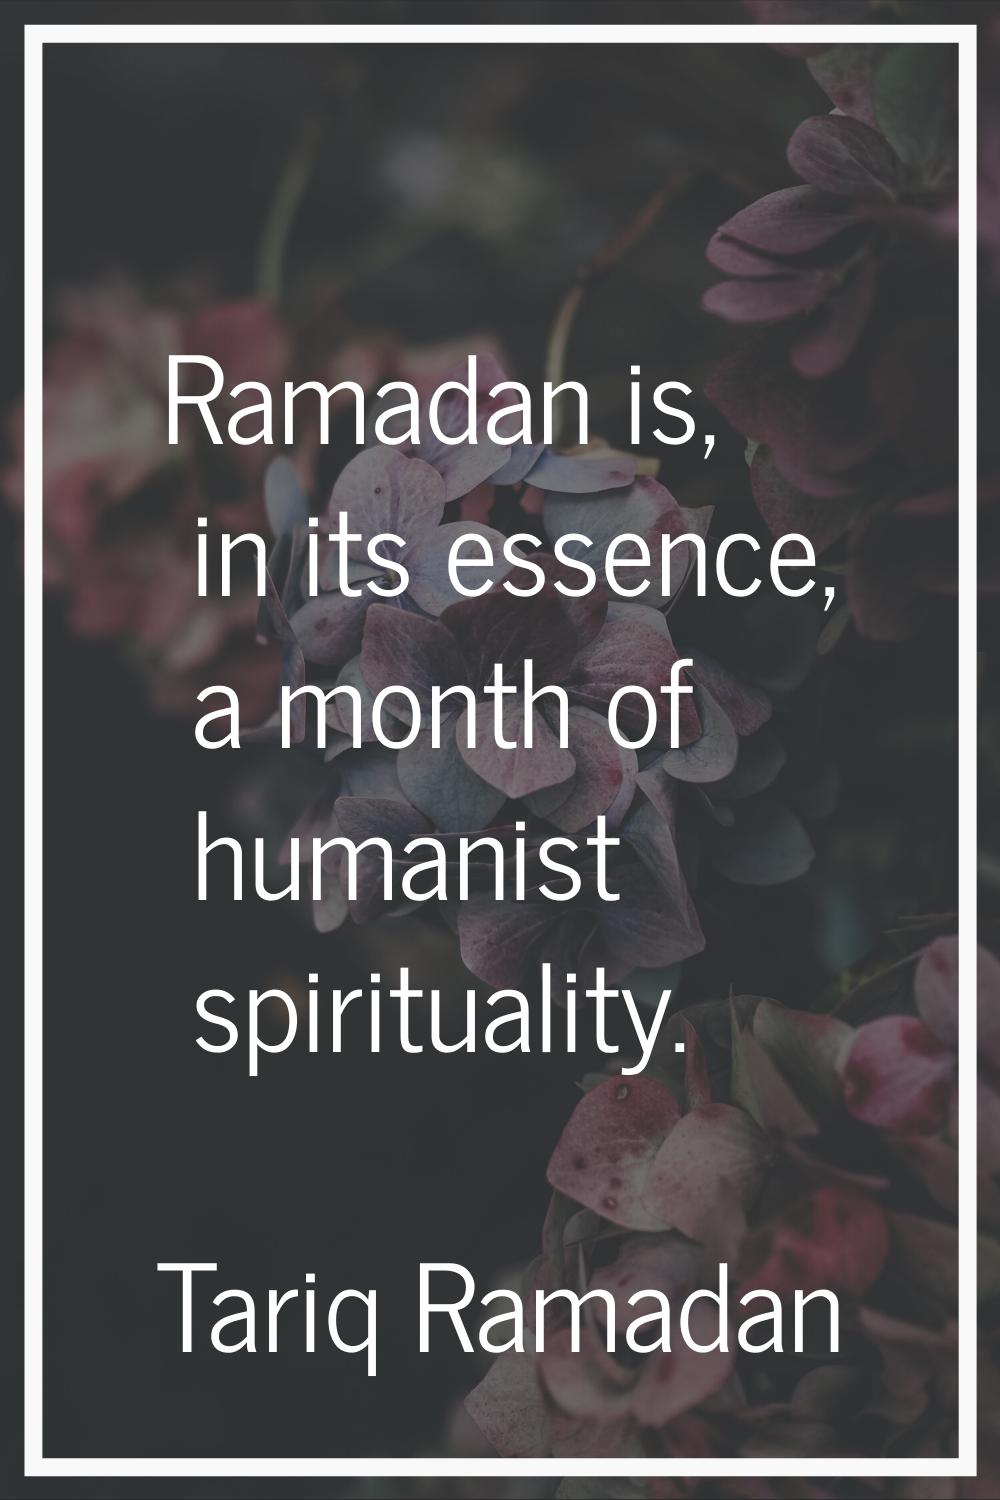 Ramadan is, in its essence, a month of humanist spirituality.